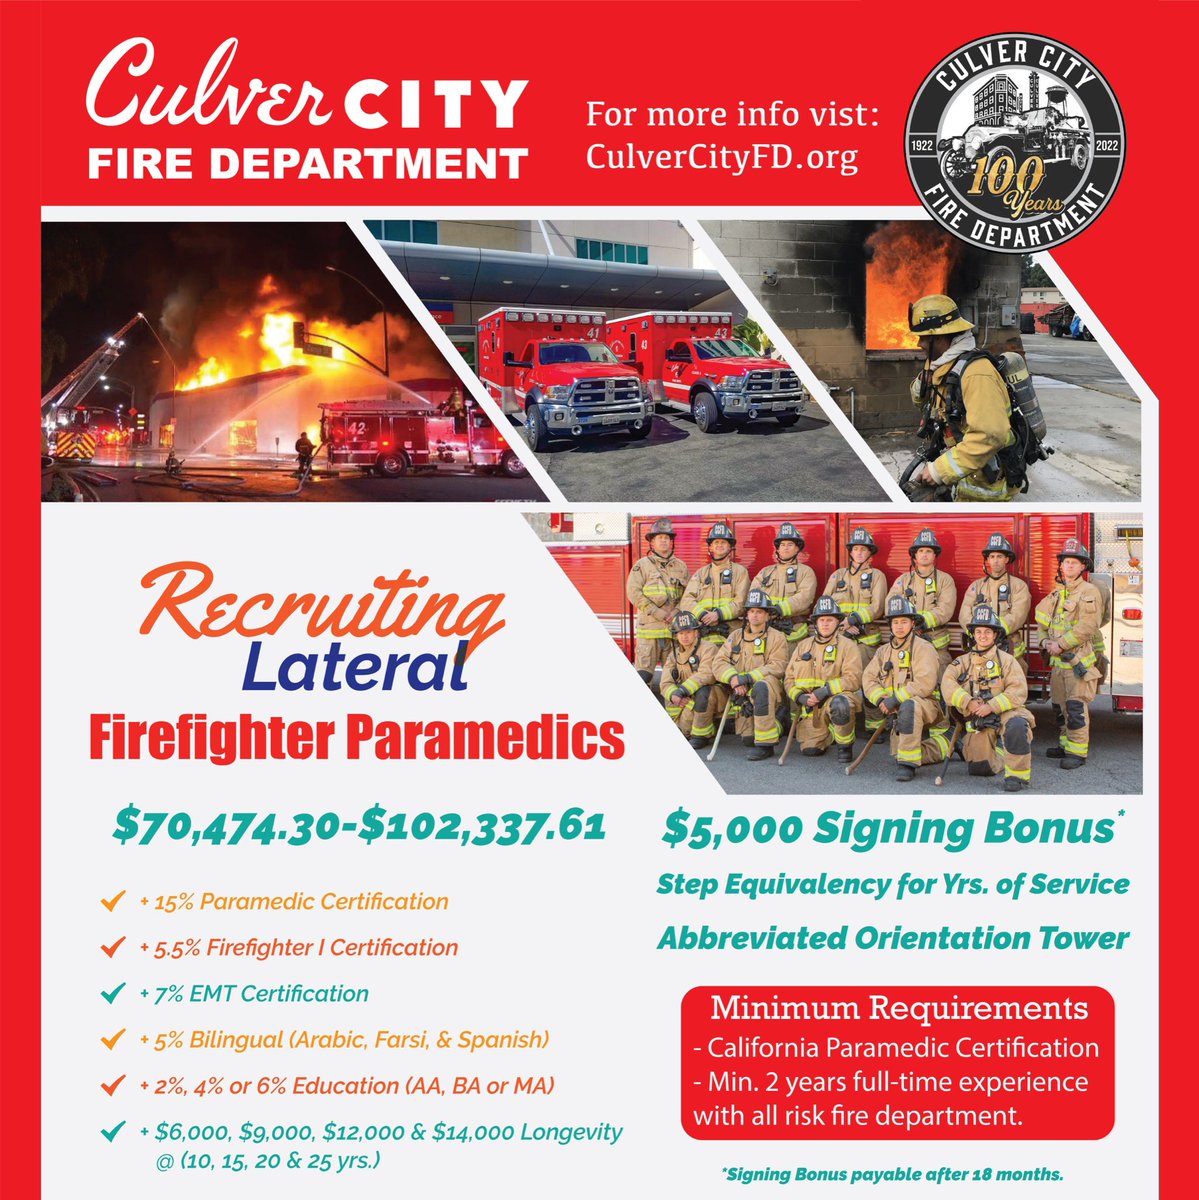 Now Hiring Lateral Firefighter Paramedics!  Apply now at CulverCity.org/Jobs 

#FireCareers #FirefighterJobs